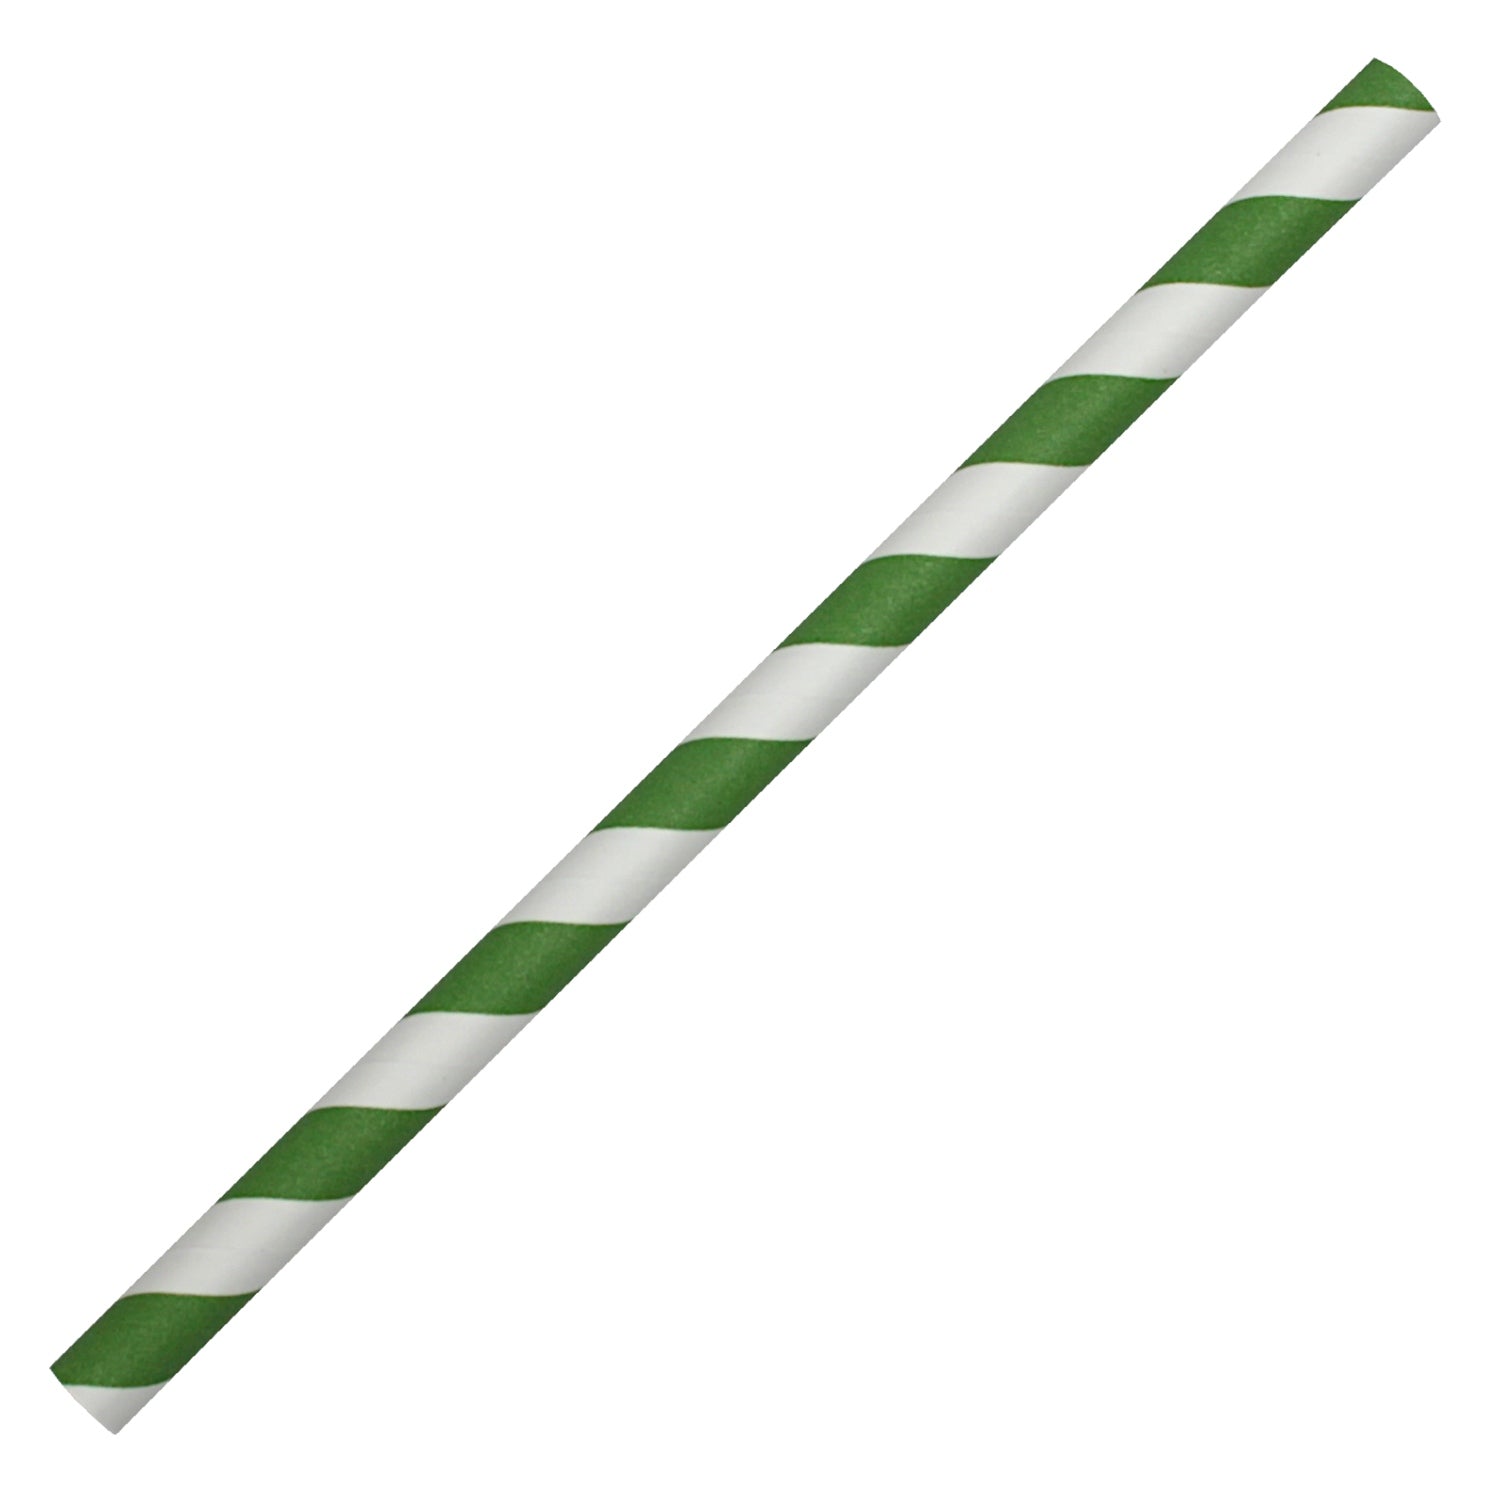 Green & White Striped Paper Straws (10mm x 200mm) - Quality Drinking Straws for Smoothies and Milkshakes - Intrinsic Paper Straws